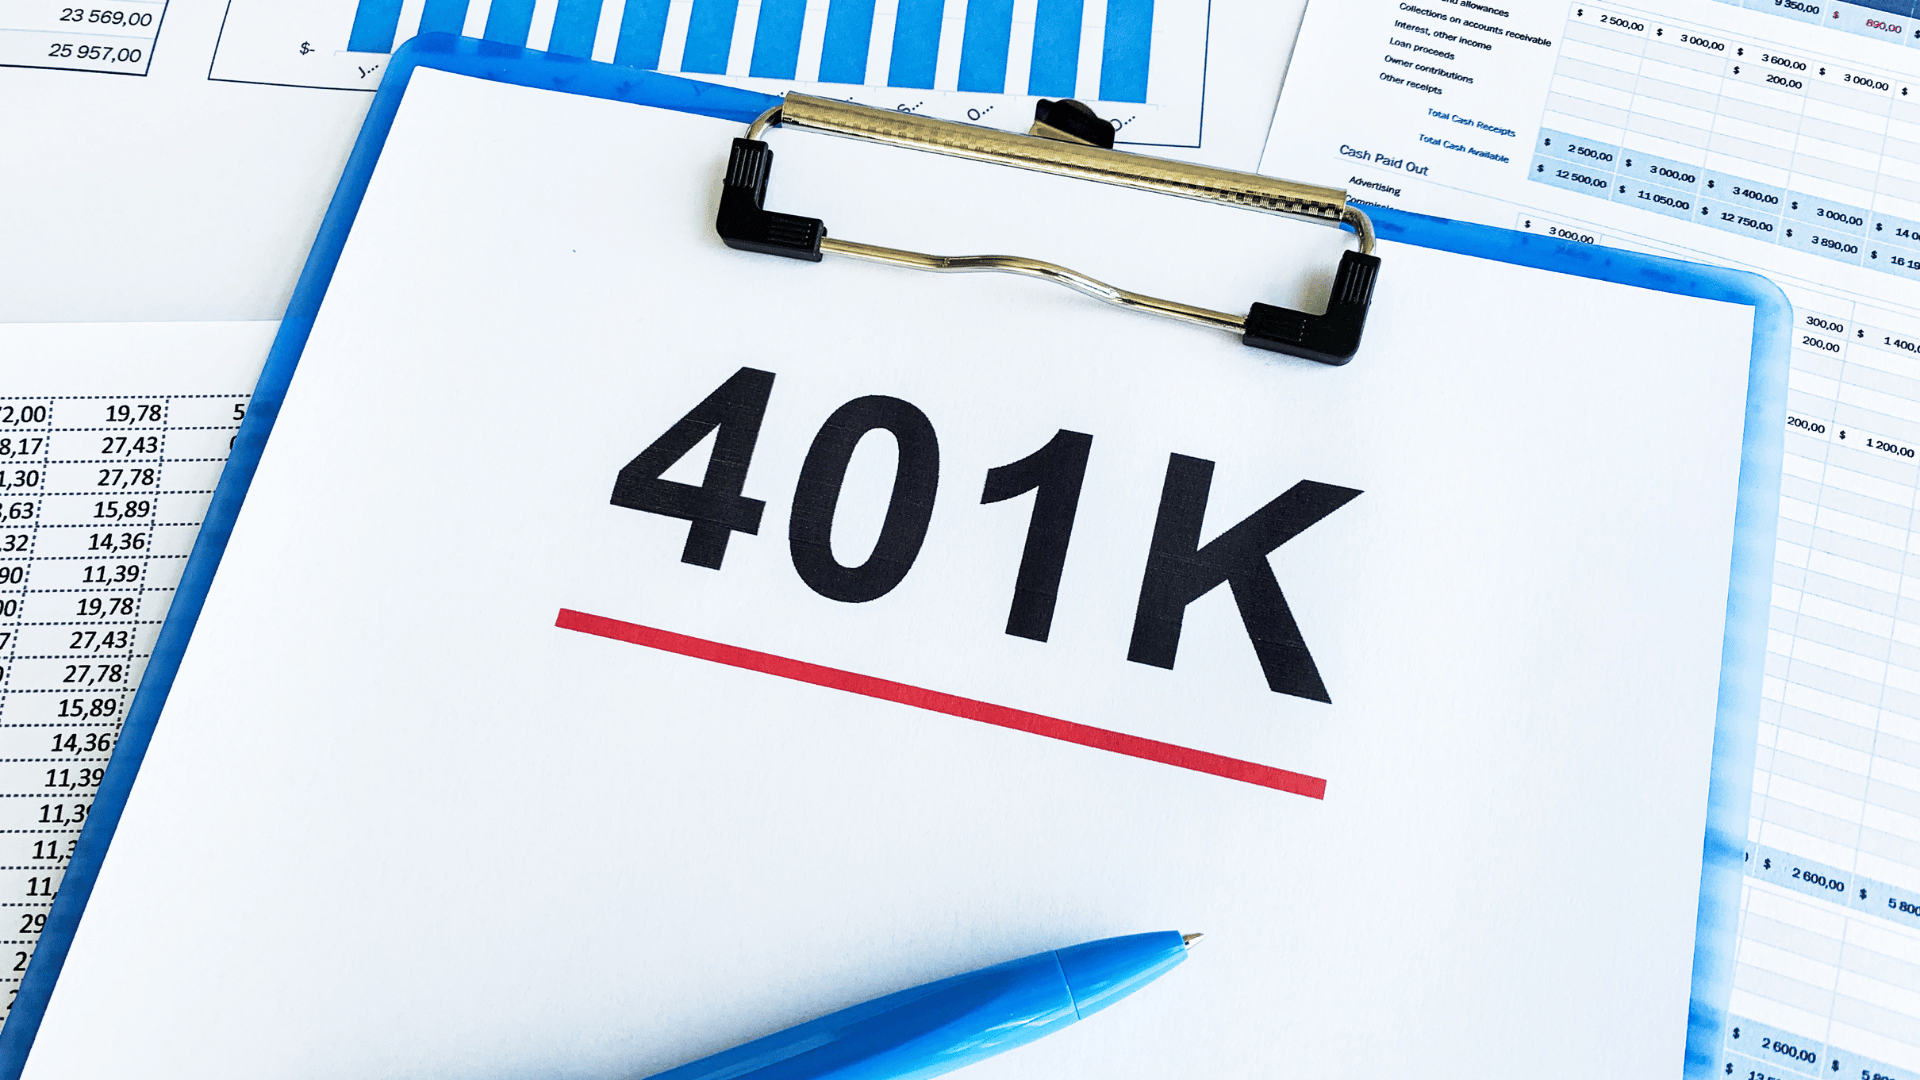 Podcast Episode 322: When Should I Rollover My 401k?